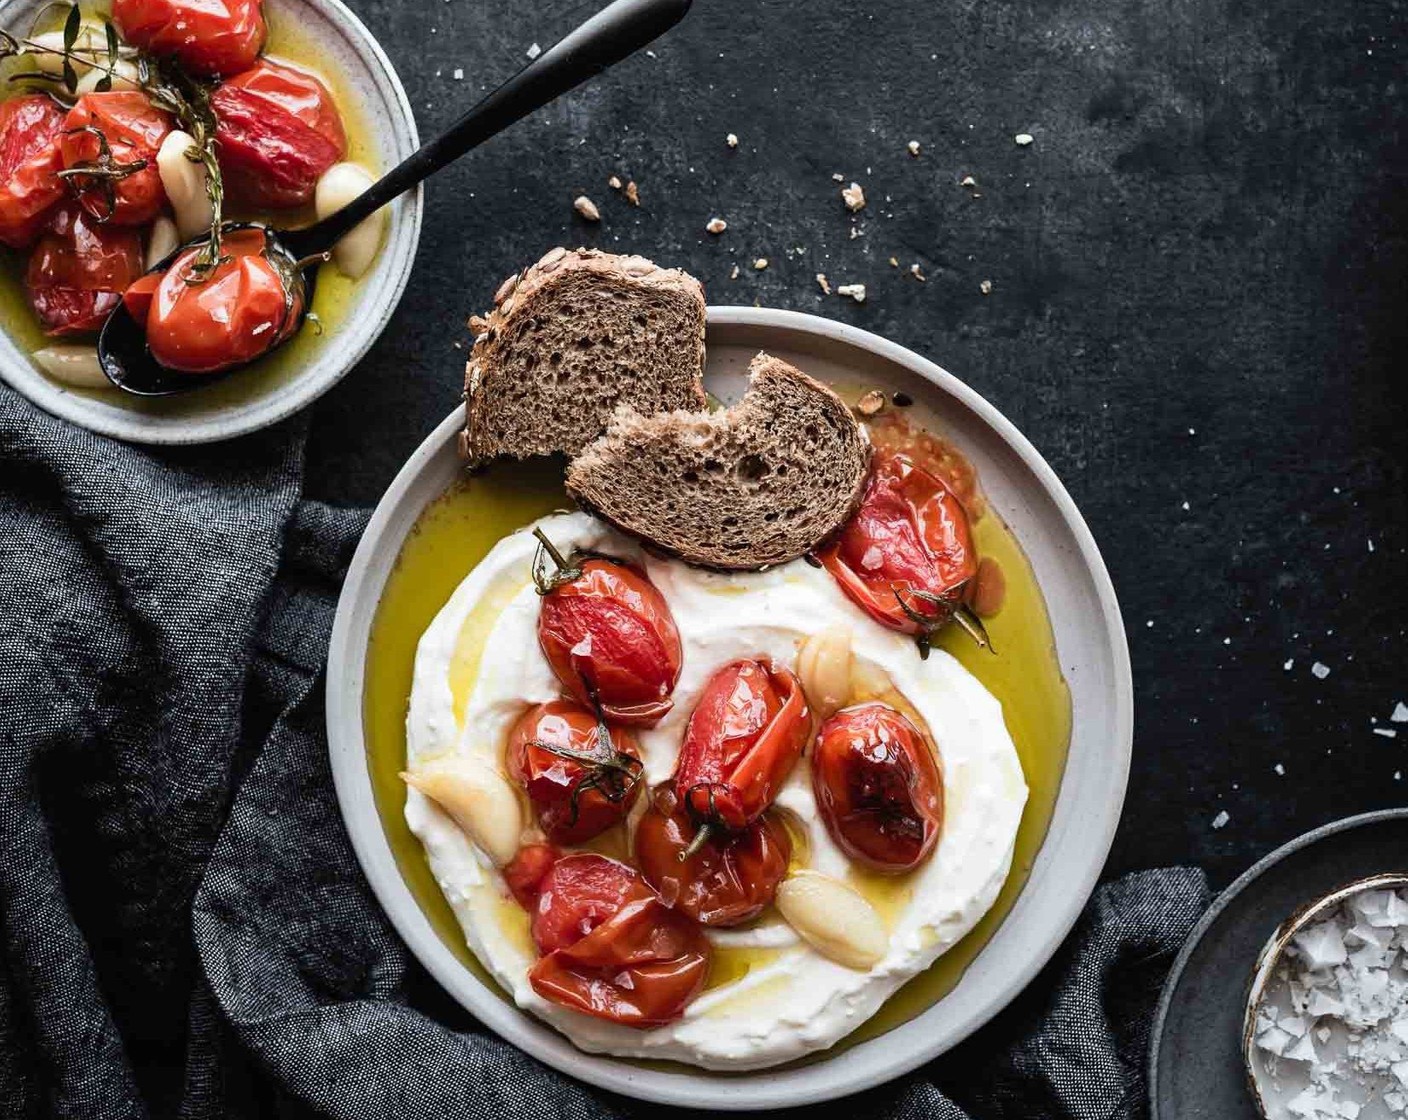 step 7 Spread a bed of whipped feta yogurt on each plate, top with tomato & garlic confit and serve with Bread (to taste) and some fried eggs if that sounds good to you!